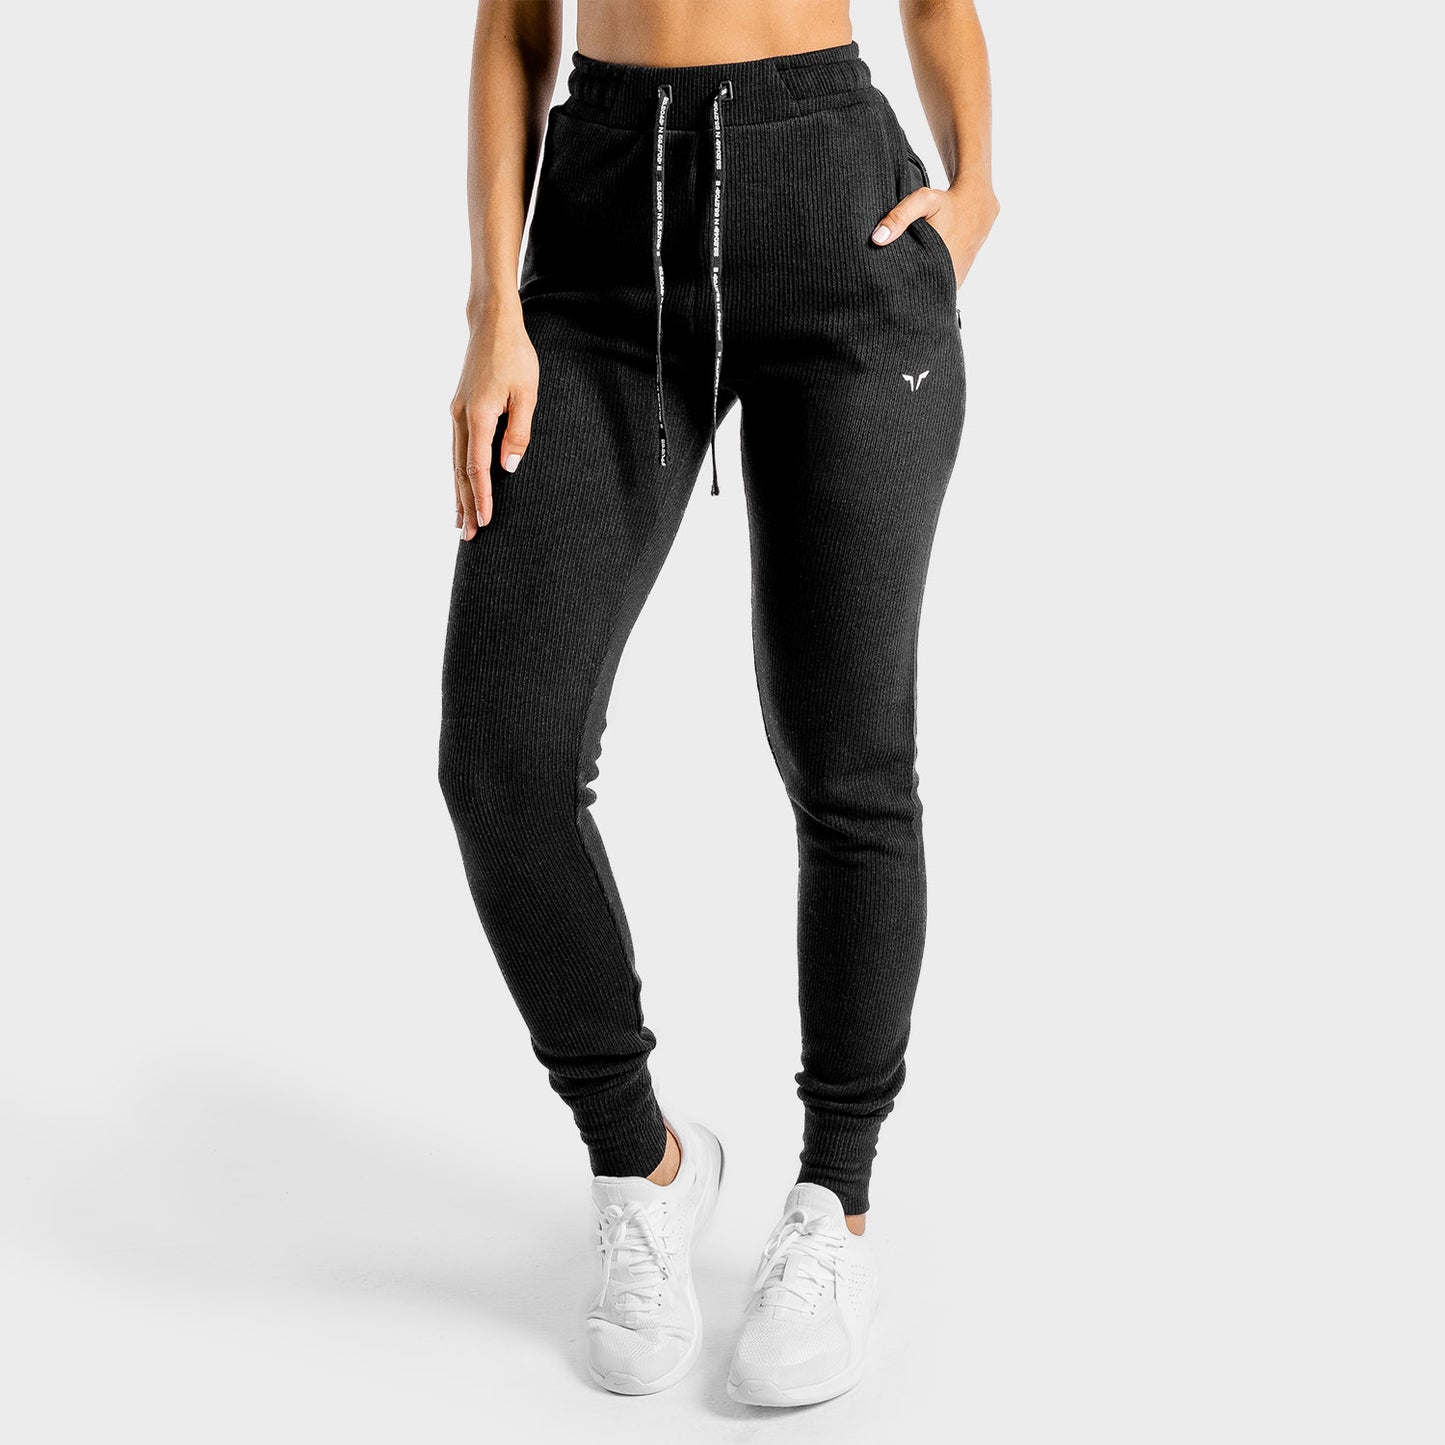 squatwolf-pants-for-women-luxe-joggers-black-gym-workout-clothes